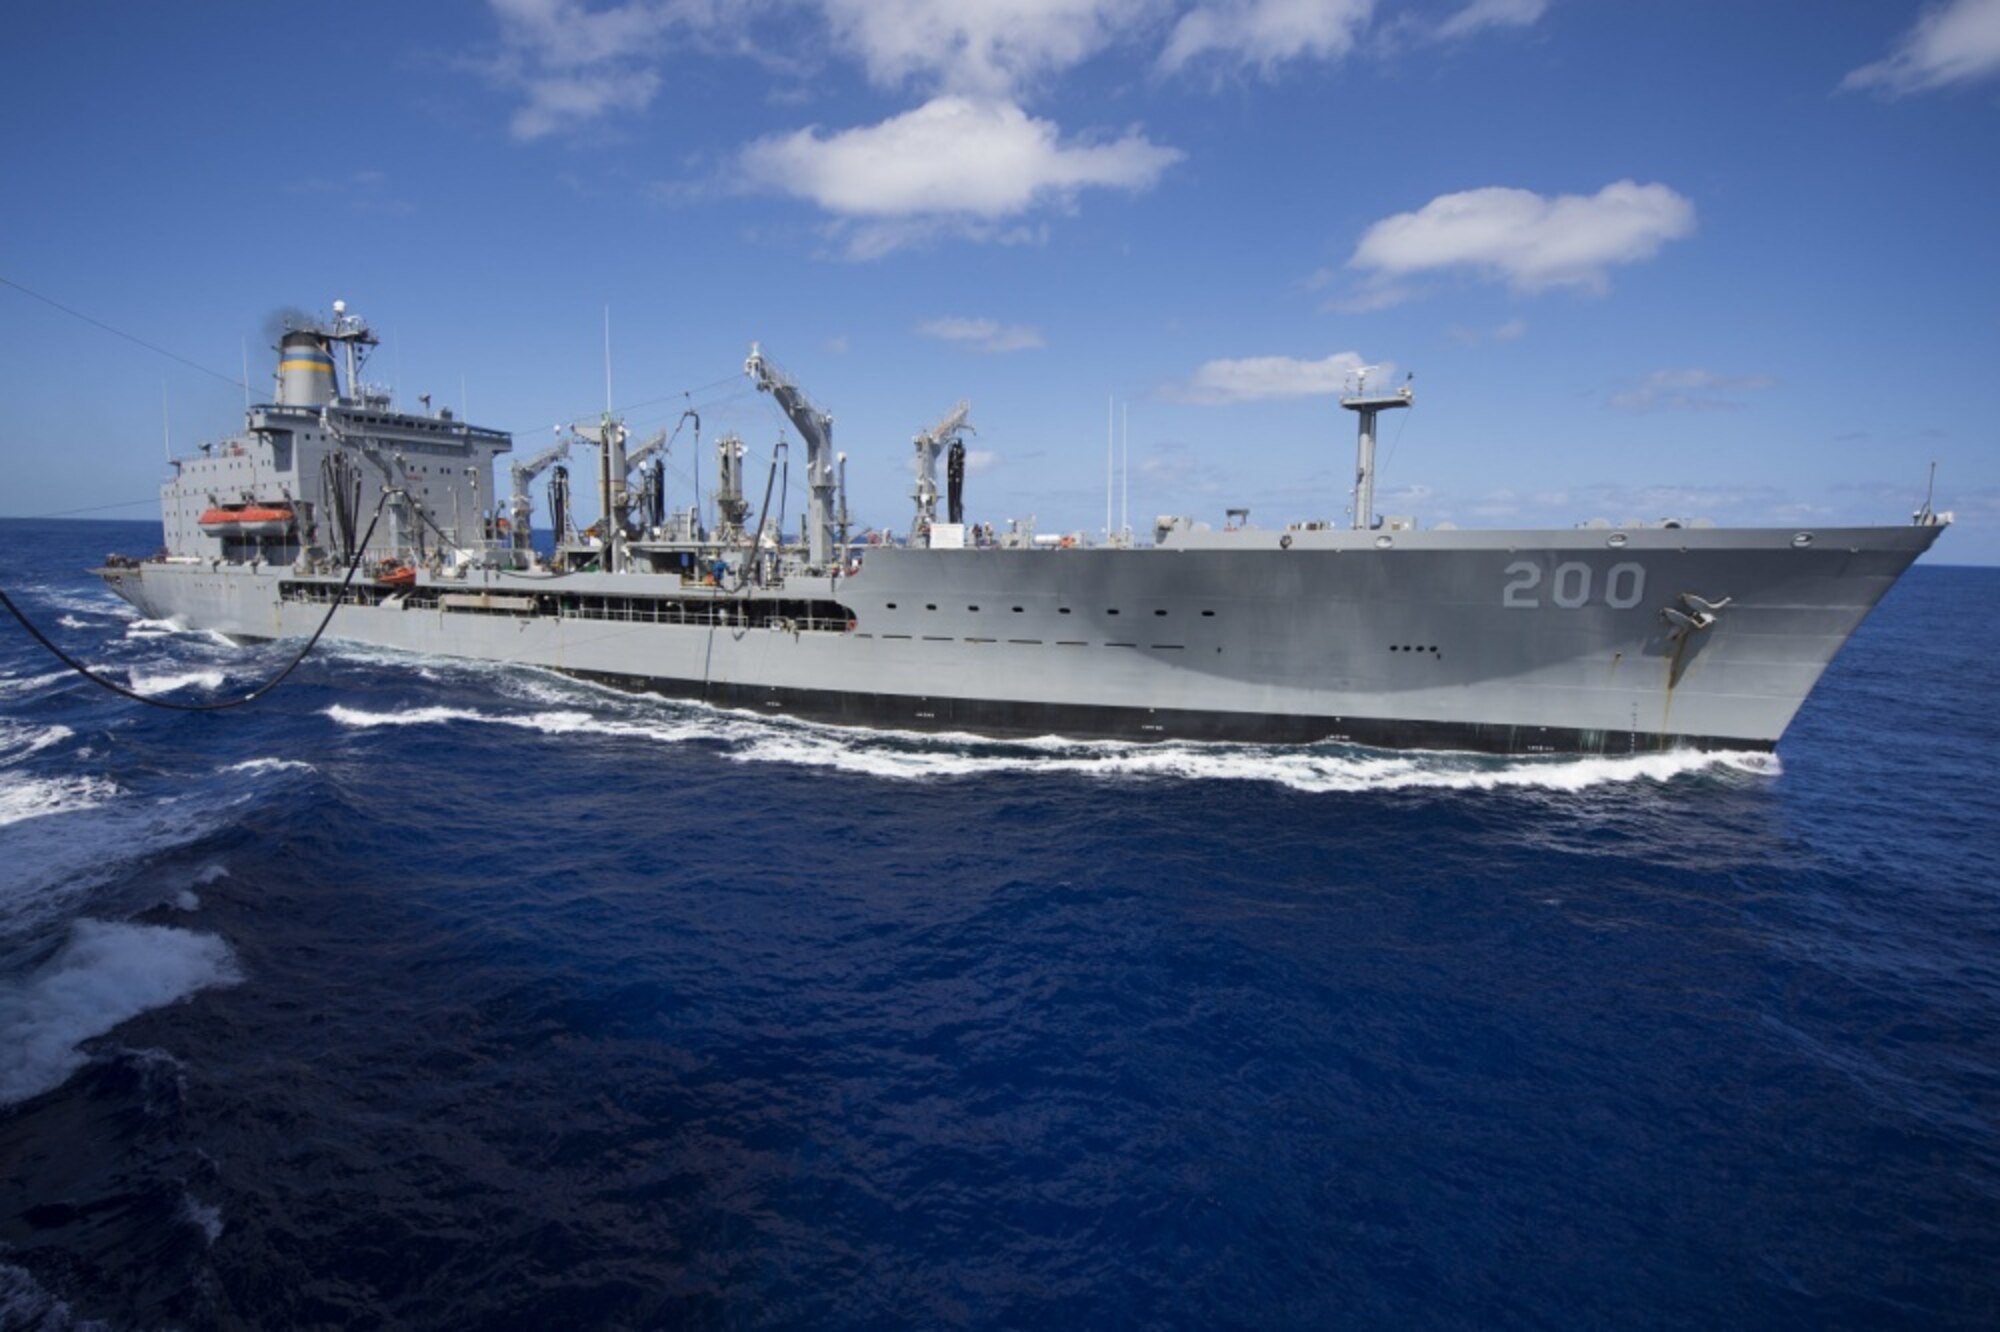 The Military Sealift Command fleet replenishment oiler USNS Guadalupe (T-AO 200) sends fuel to the dock landing ship USS Comstock (LSD 45) during a replenishment at sea. Comstock, part of the Makin Island Amphibious Ready Group, and the embarked 11th Marine Expeditionary Unit are returning to homeport San Diego following a seven-month deployment to the Western Pacific and the U.S. Central Command areas of operation. (U.S. Navy photo by Mass Communication Specialist 3rd Class Lenny LaCrosse/Released) 